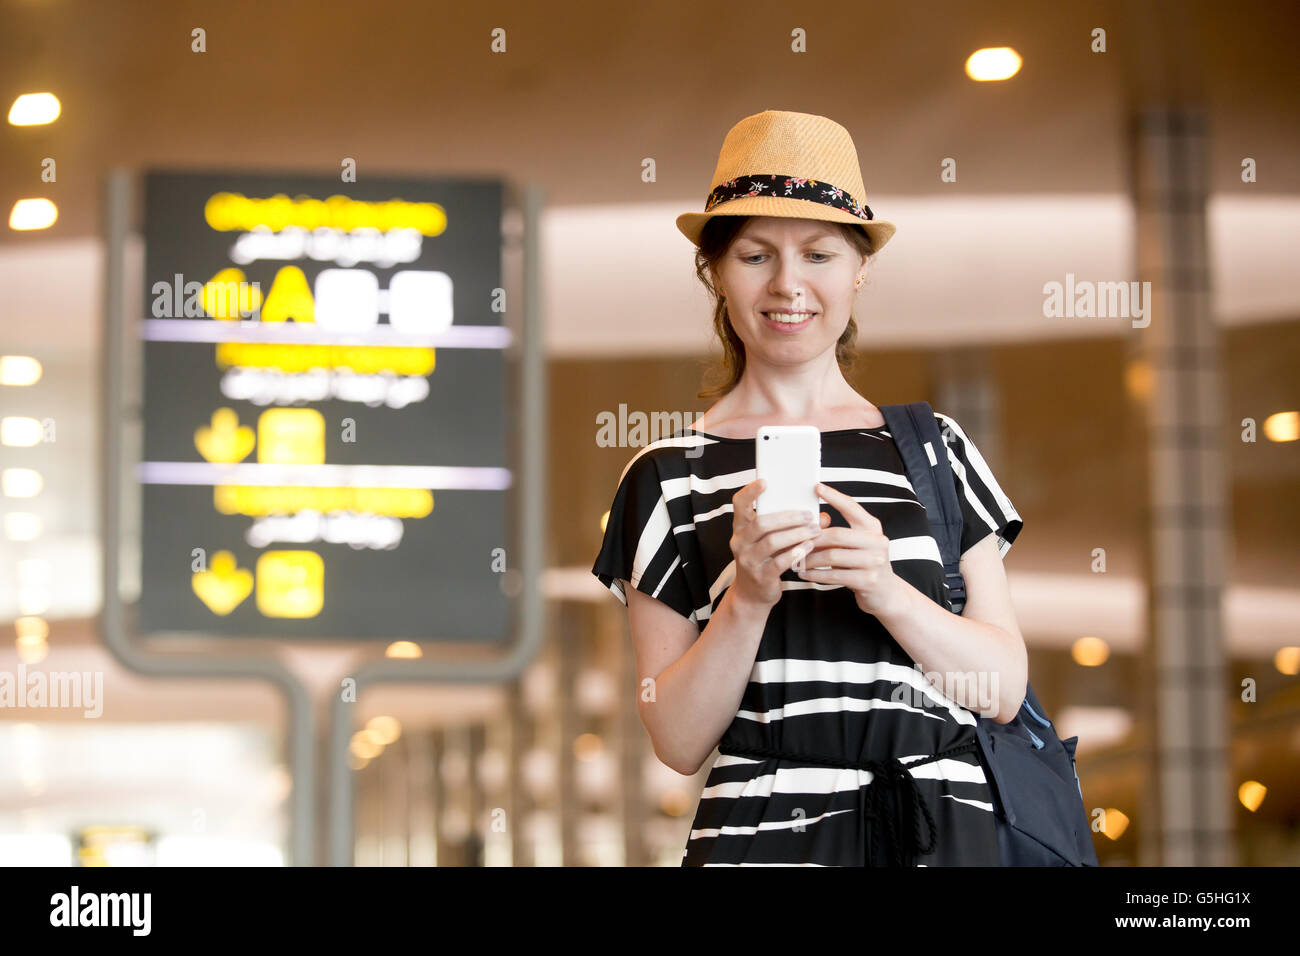 Smiling young woman in straw hat in her 20s walking in modern airport terminal building, holding smartphone, looking at screen Stock Photo